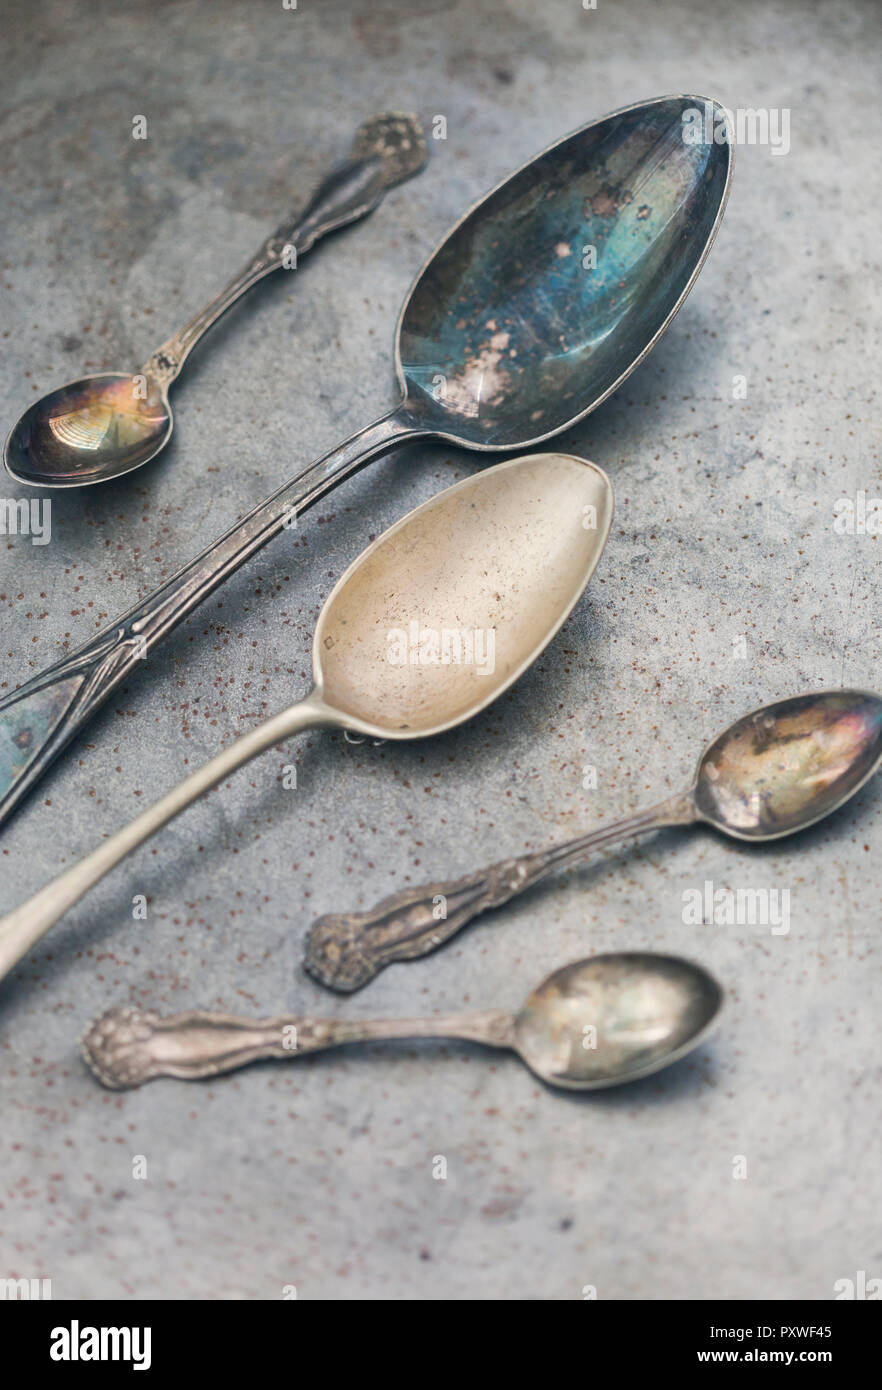 Old spoons on metal Stock Photo